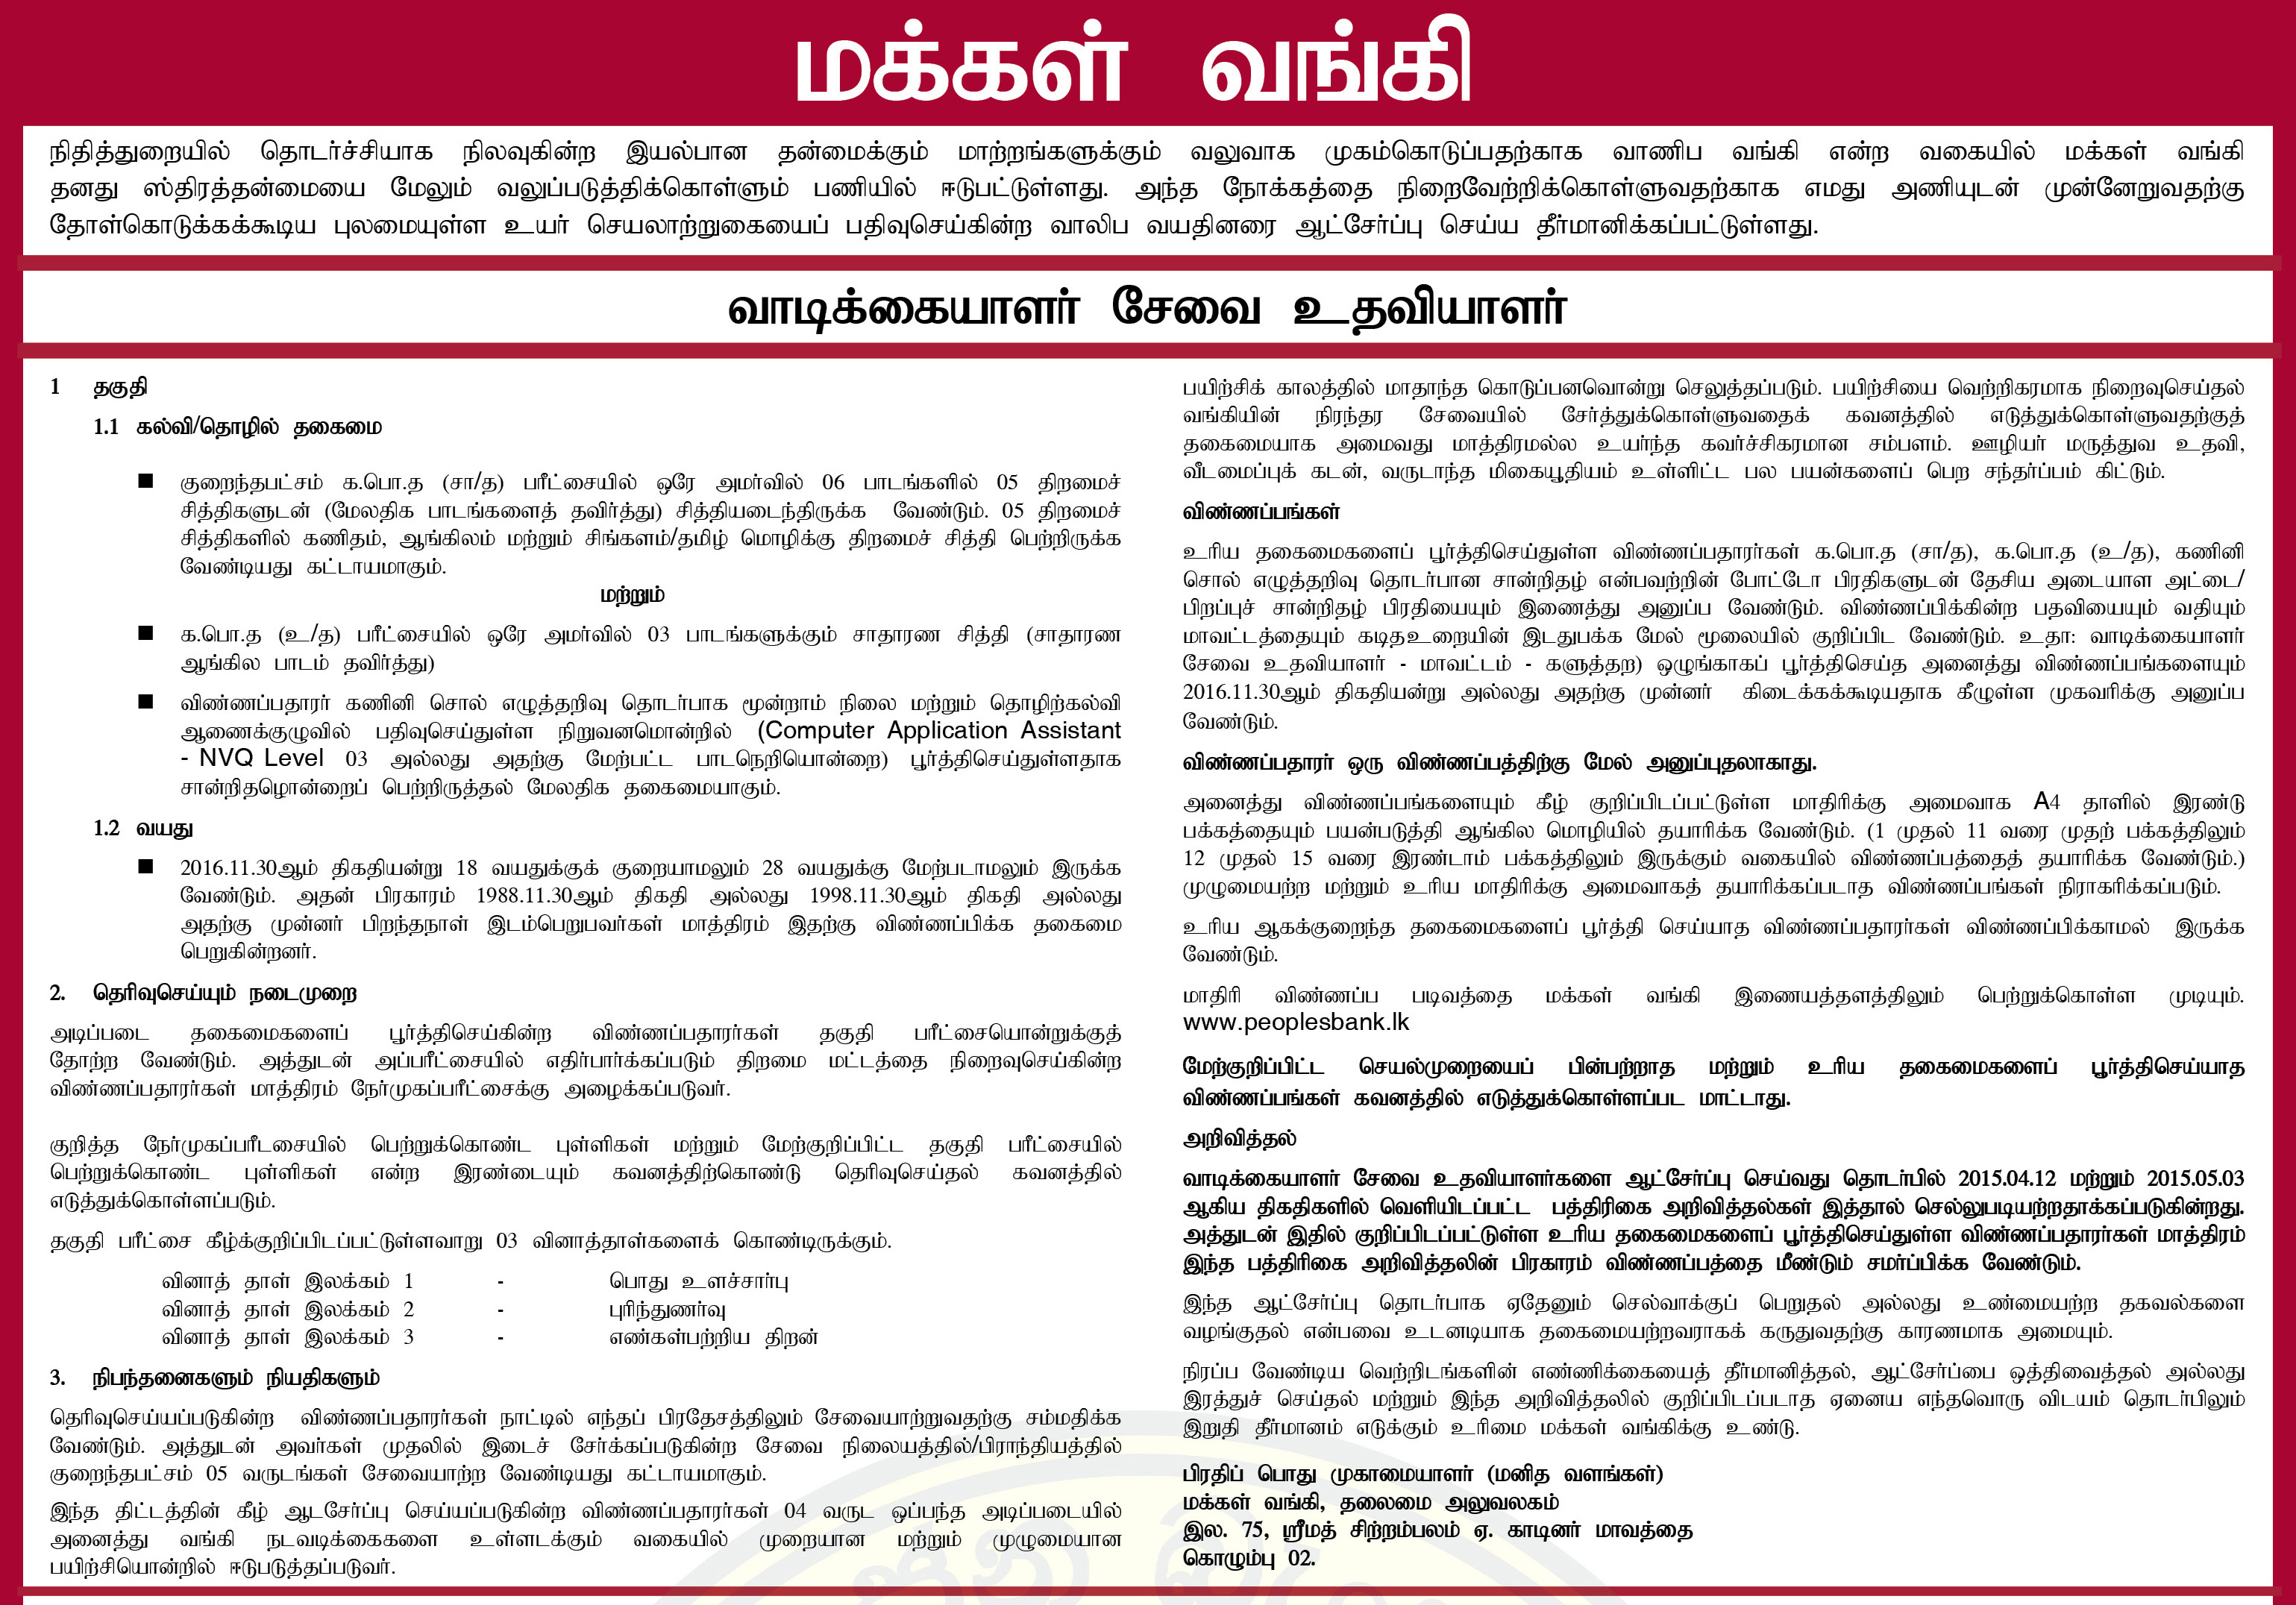 Customer Service Assistant Vacancy in Peoples Bank Tamil Details